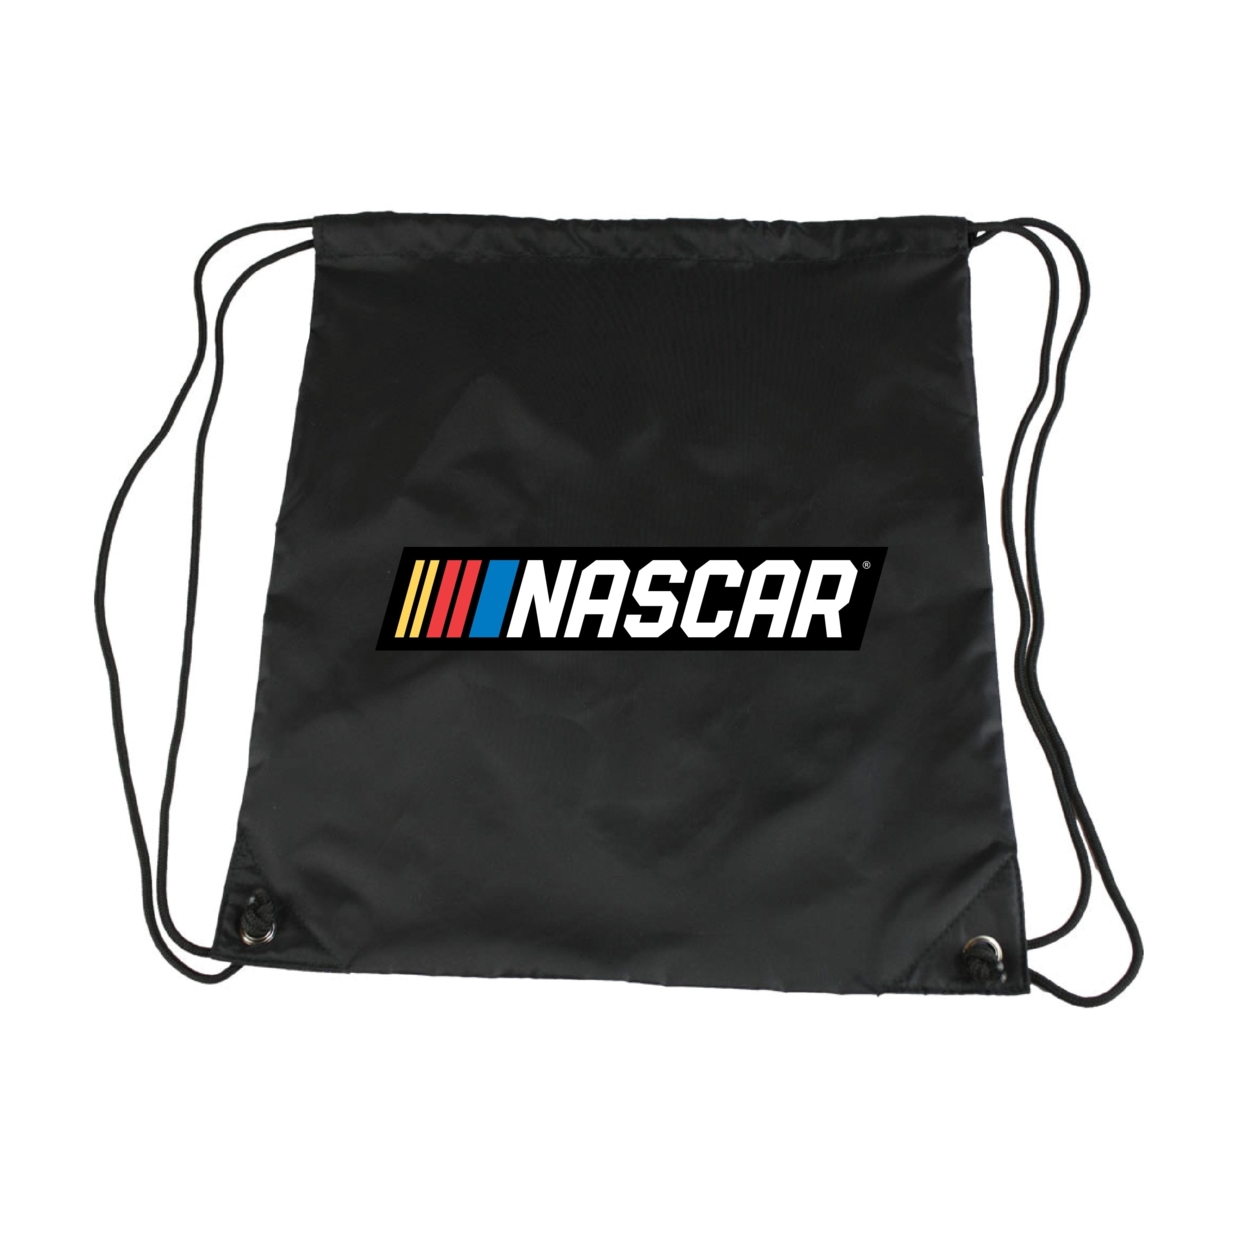 NASCAR Officially Licensed Cinch Bag With Drawstring